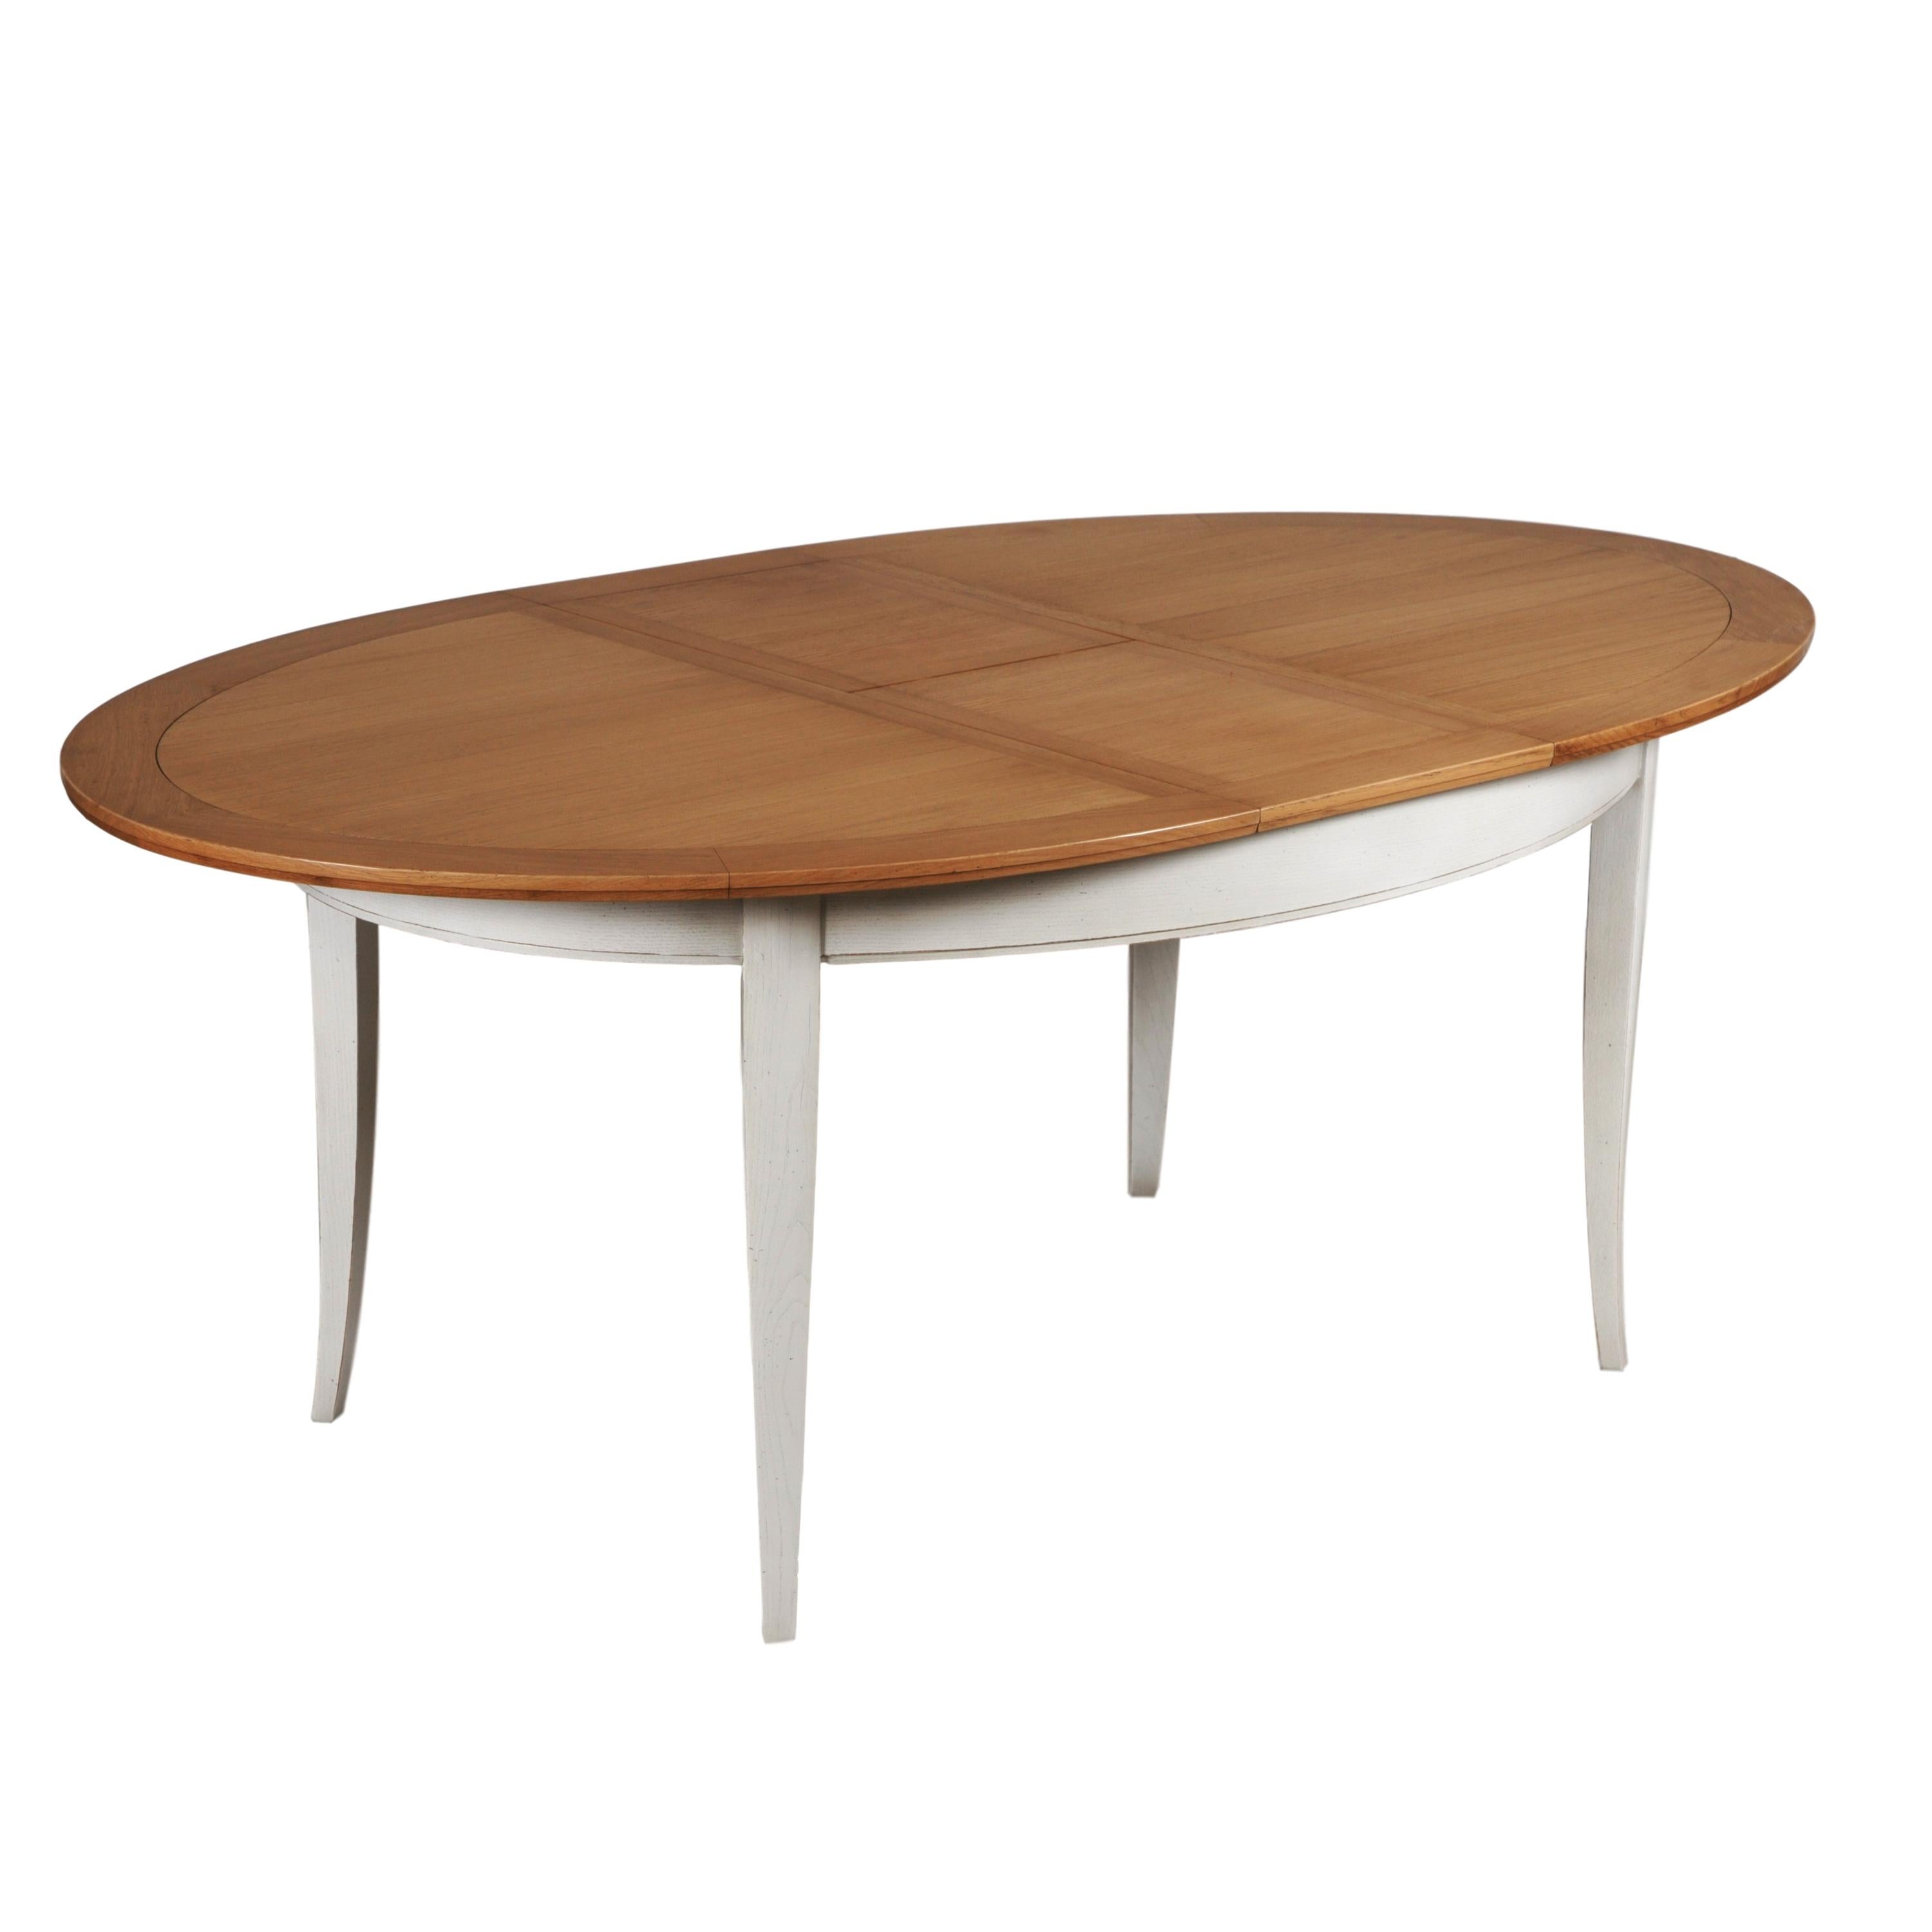 Contemporary Oval Table in Solid Oak, 2 Extensions, Chestnut Stained & Pearl-Grey Lacquered For Sale